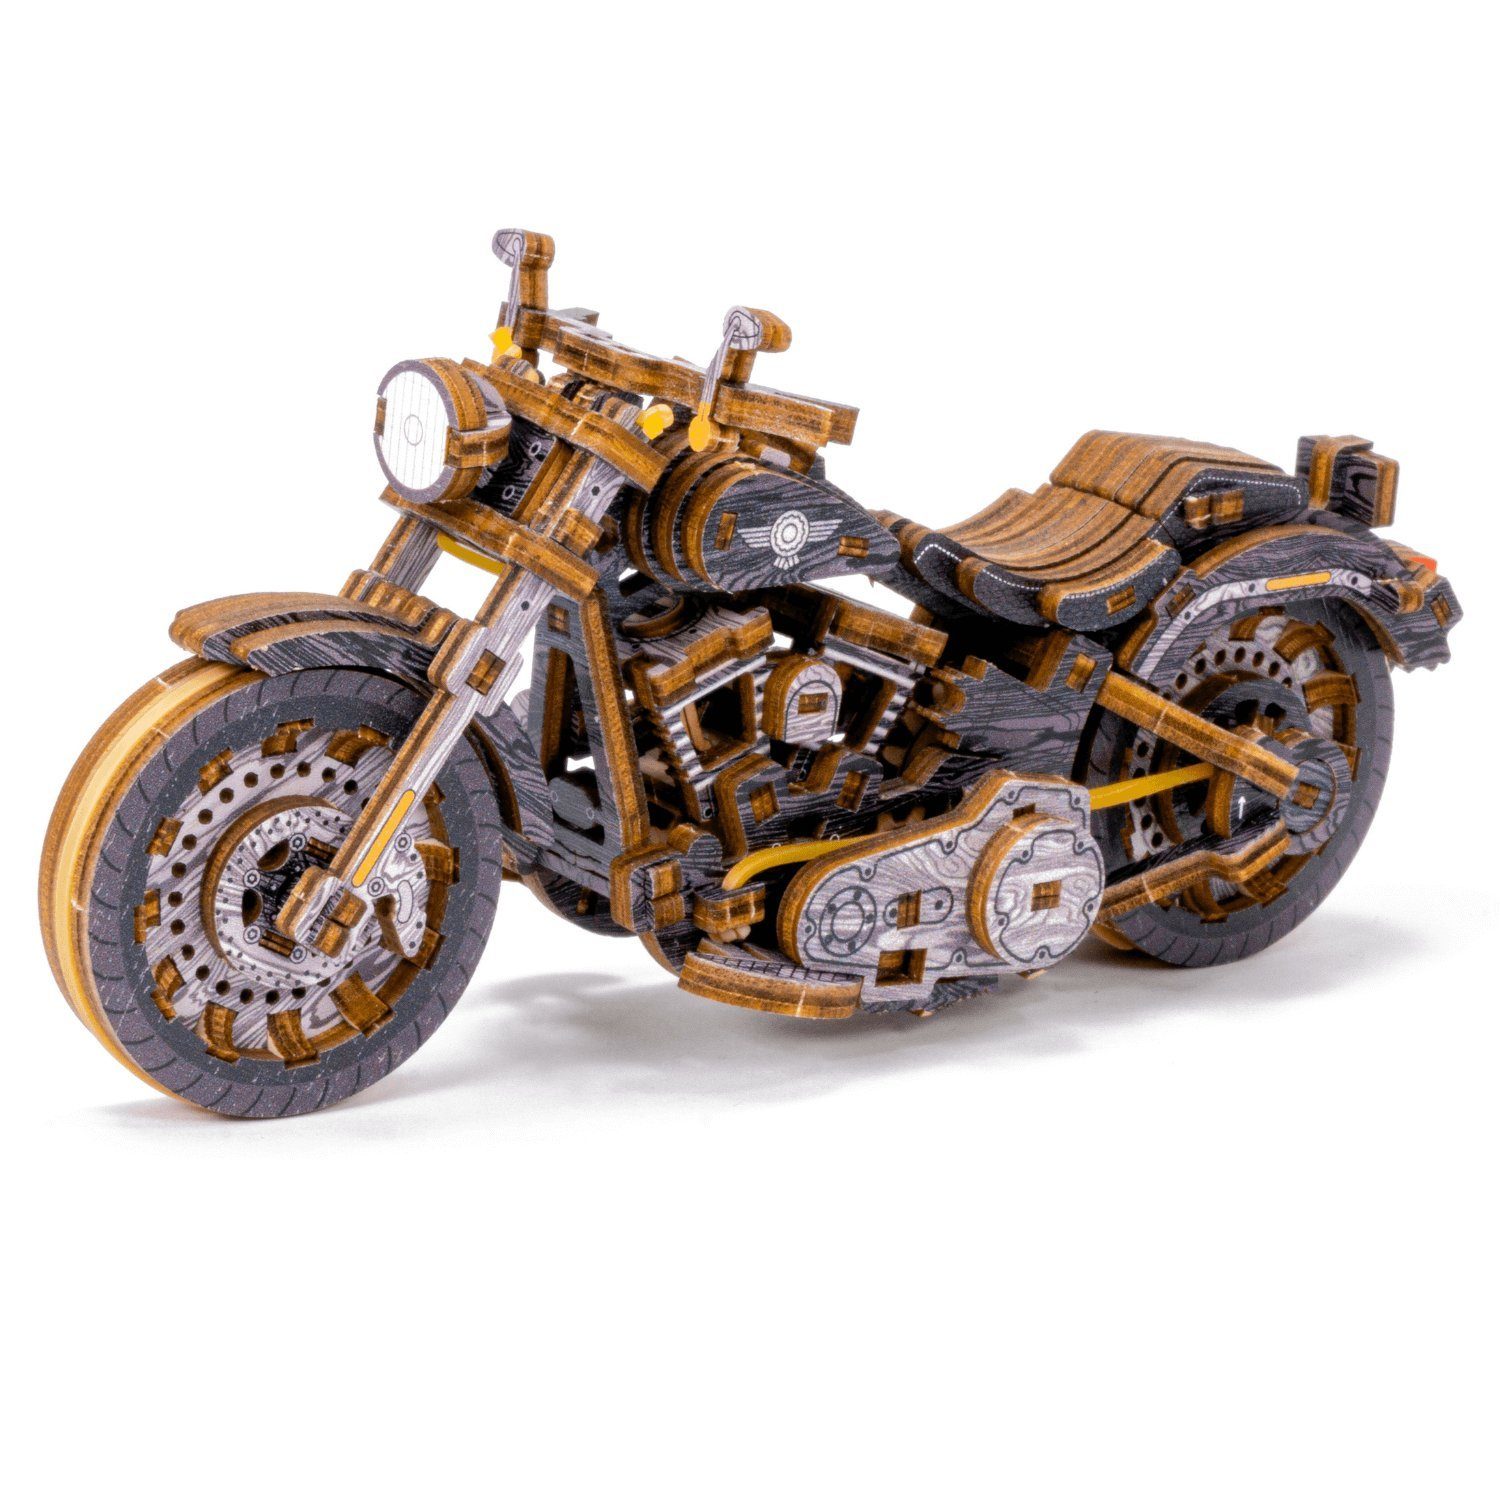 Wooden City Puzzle WoodenCity Cruiser Limited Edition Mechanisches Holzpuzzle, 156 Puzzleteile